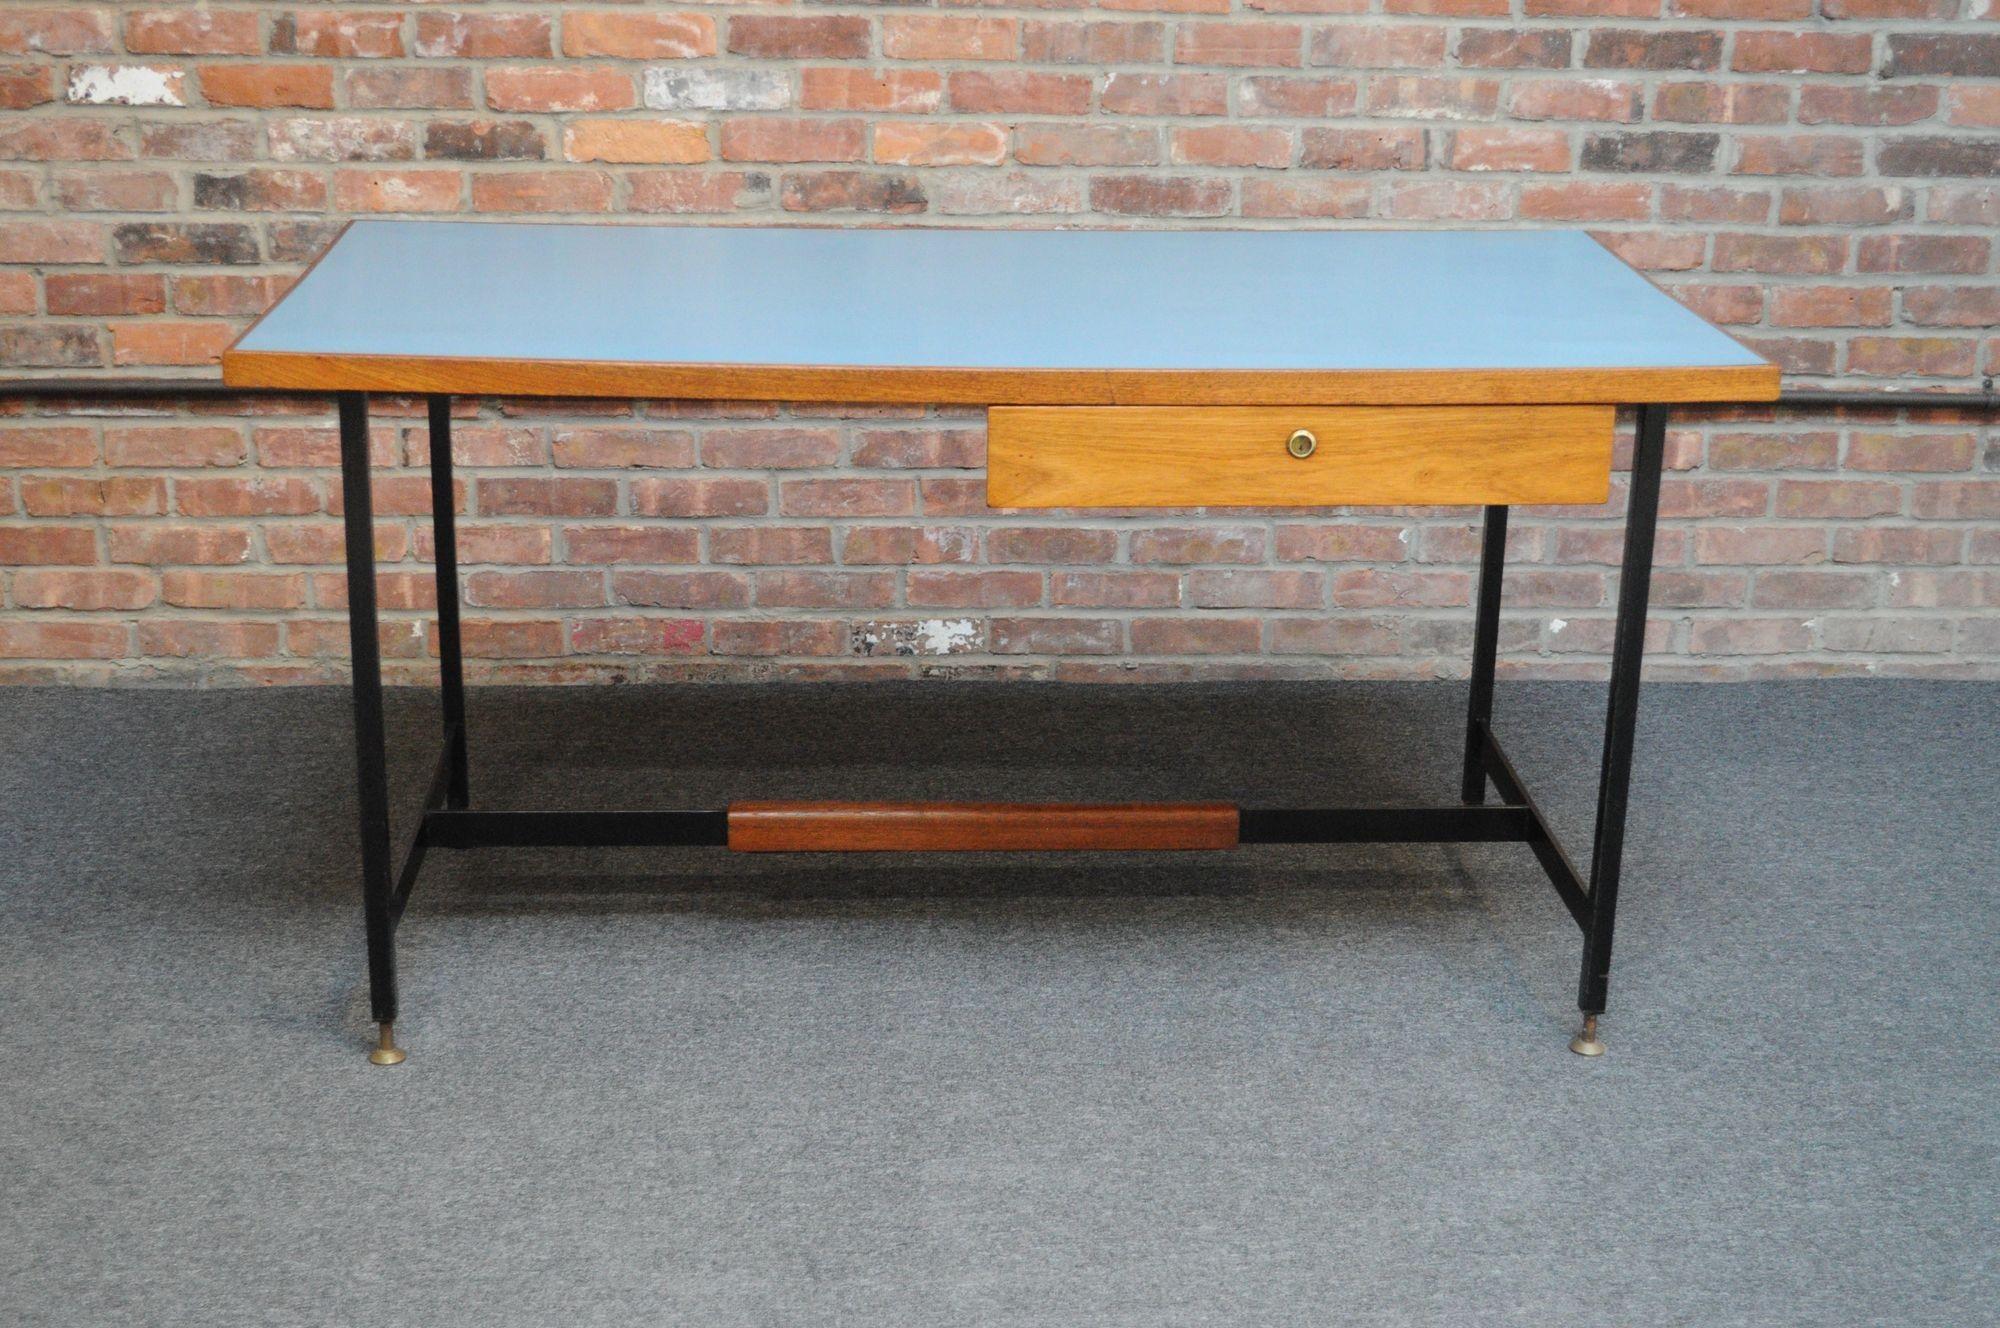 Single-drawer desk composed of a light blue laminate surface with walnut trim, drawer and foot rest, all supported by a black steel base with patinated brass, adjustable feet (ca. 1950s, Italy).
Well designed and crafted with dovetail details and